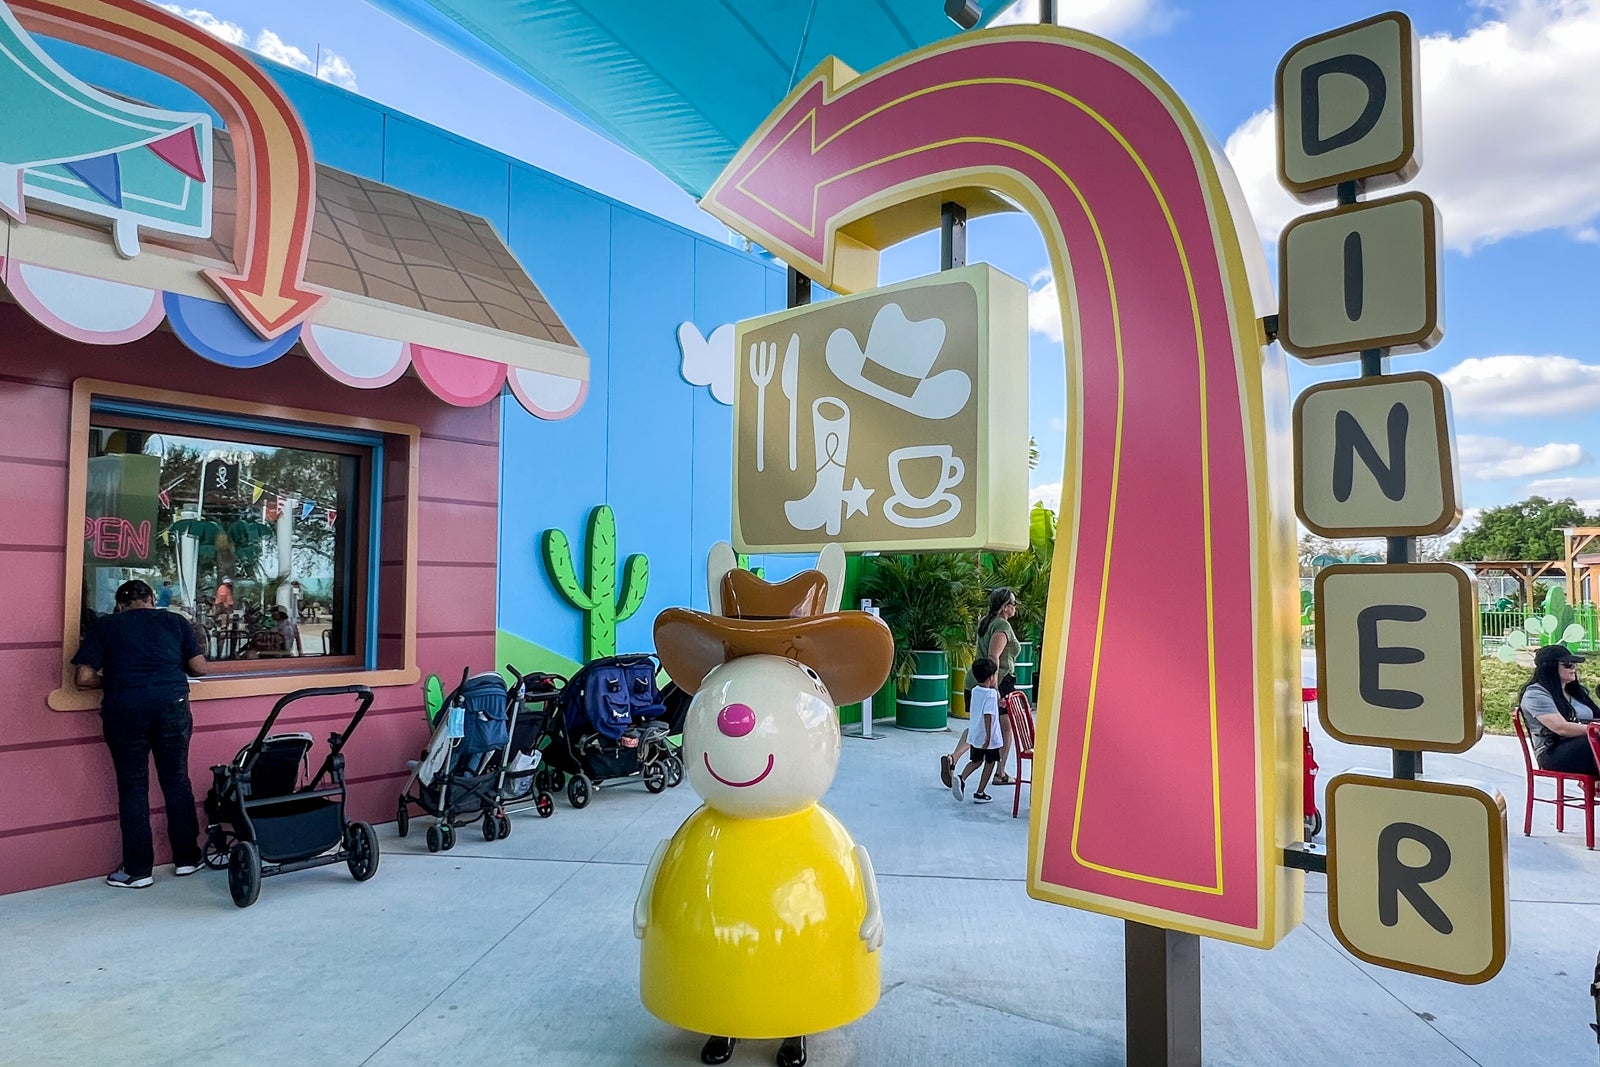 Exterior of diner at Peppa Pig Theme Park